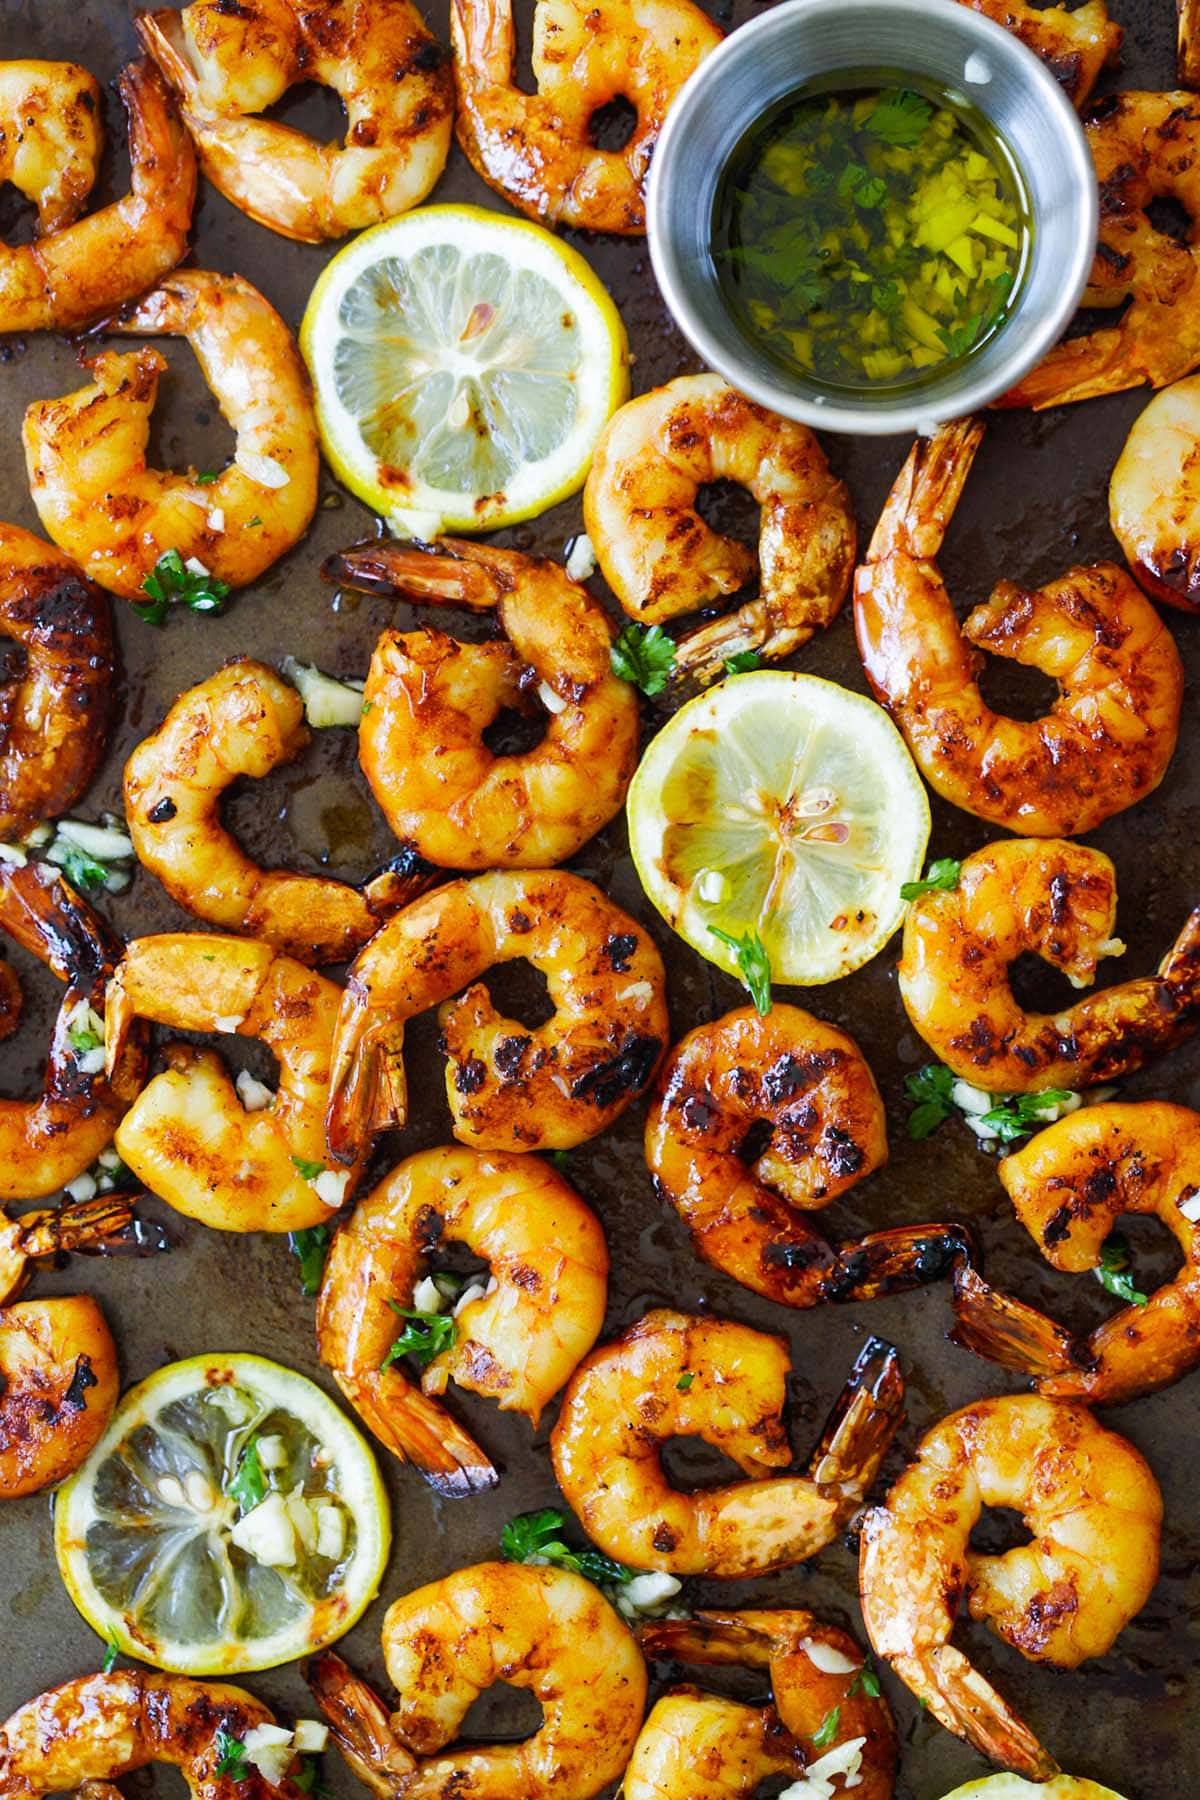 Top down view of grilled shrimp and lime slices beautifully arranged.